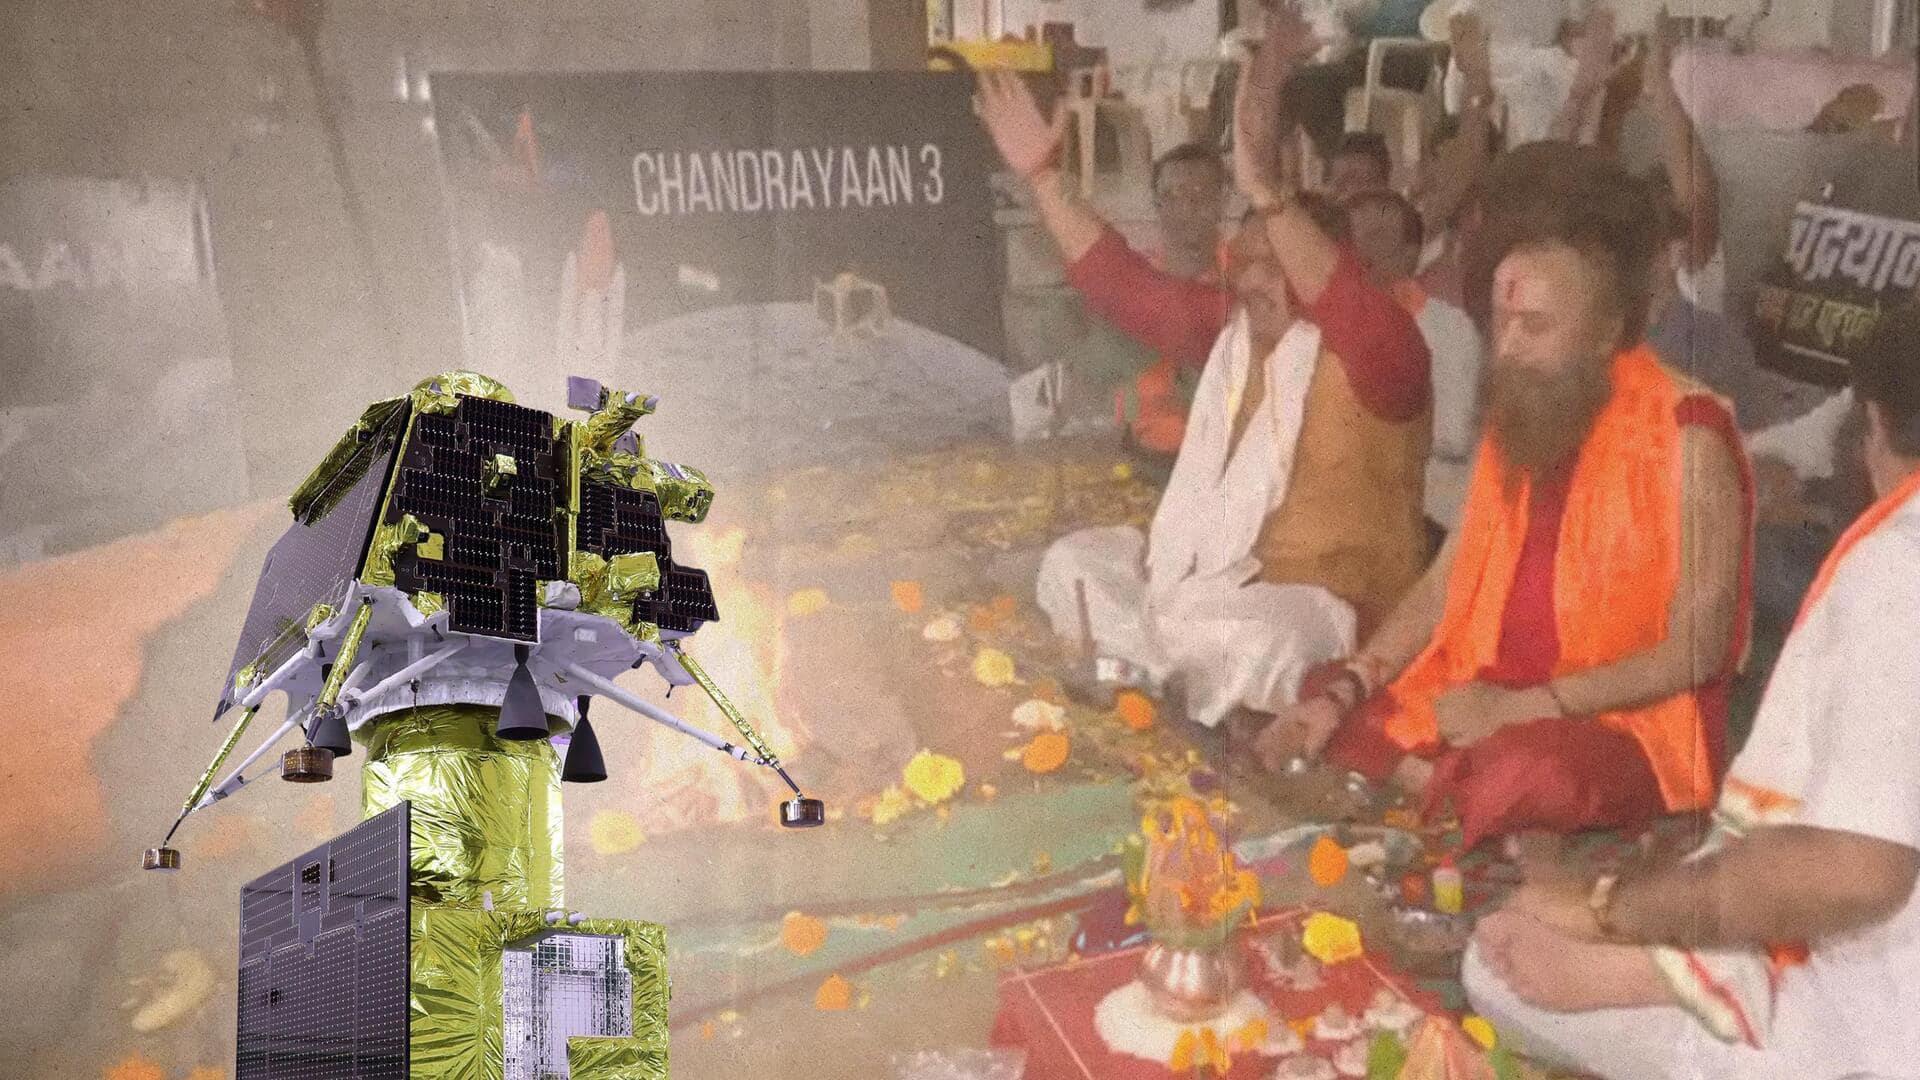 Indians across world pray for Chandrayaan-3's successful Moon landing